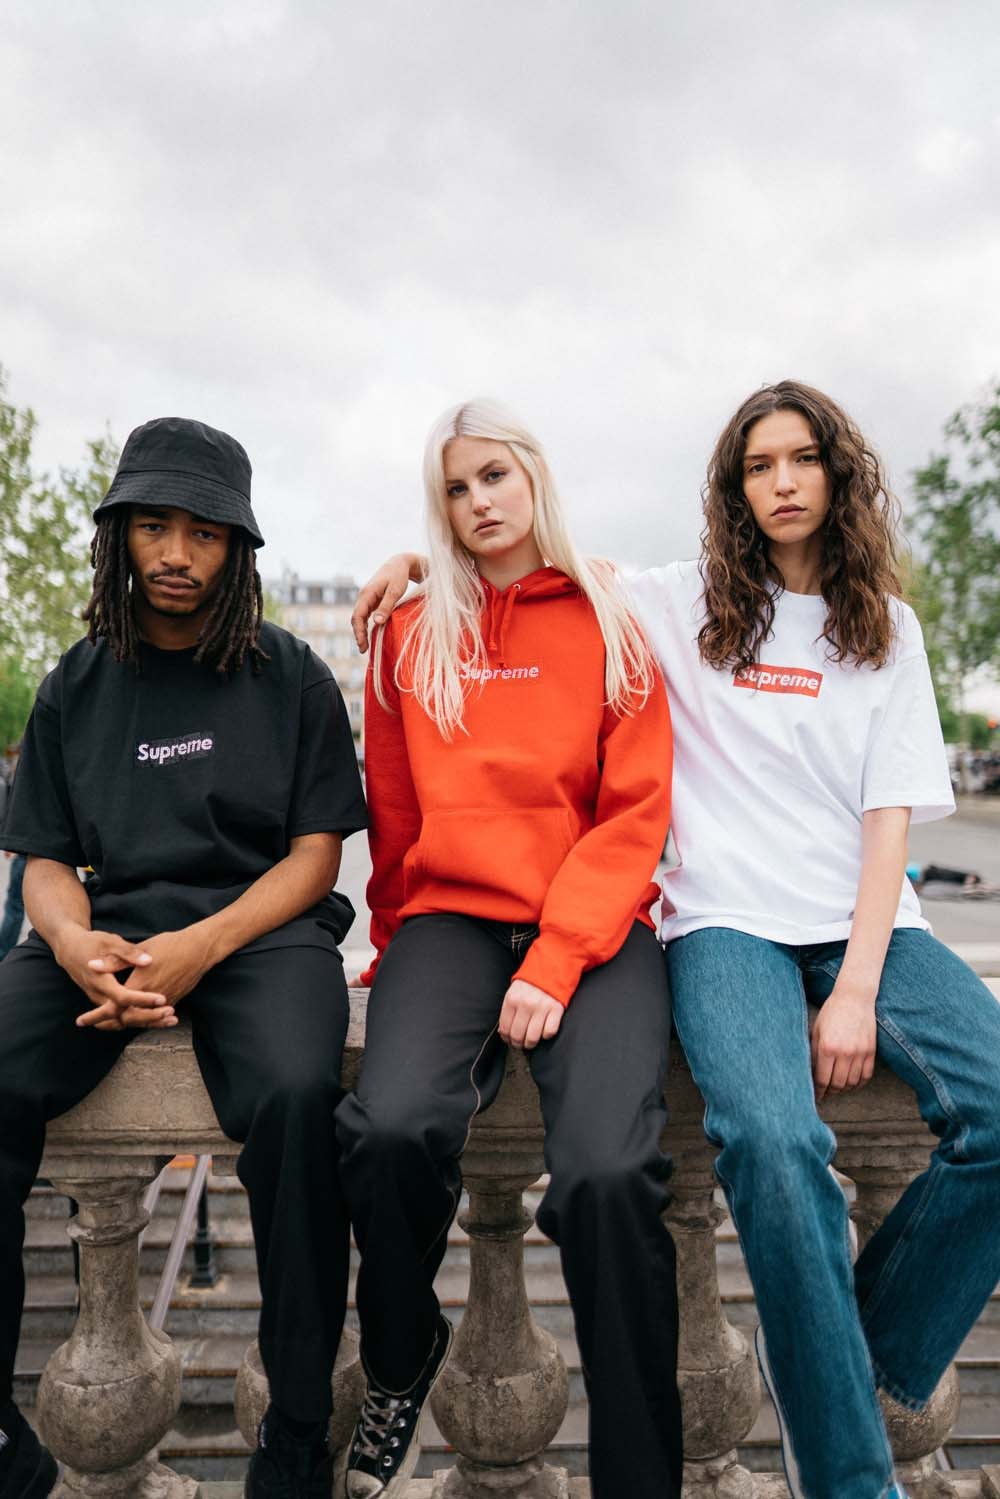 Supreme x Swarovski Box Logo Anniversary Drop collection on body hoodie tee shirt release day april 25 2019 exclusive france paris day model colorway crystal